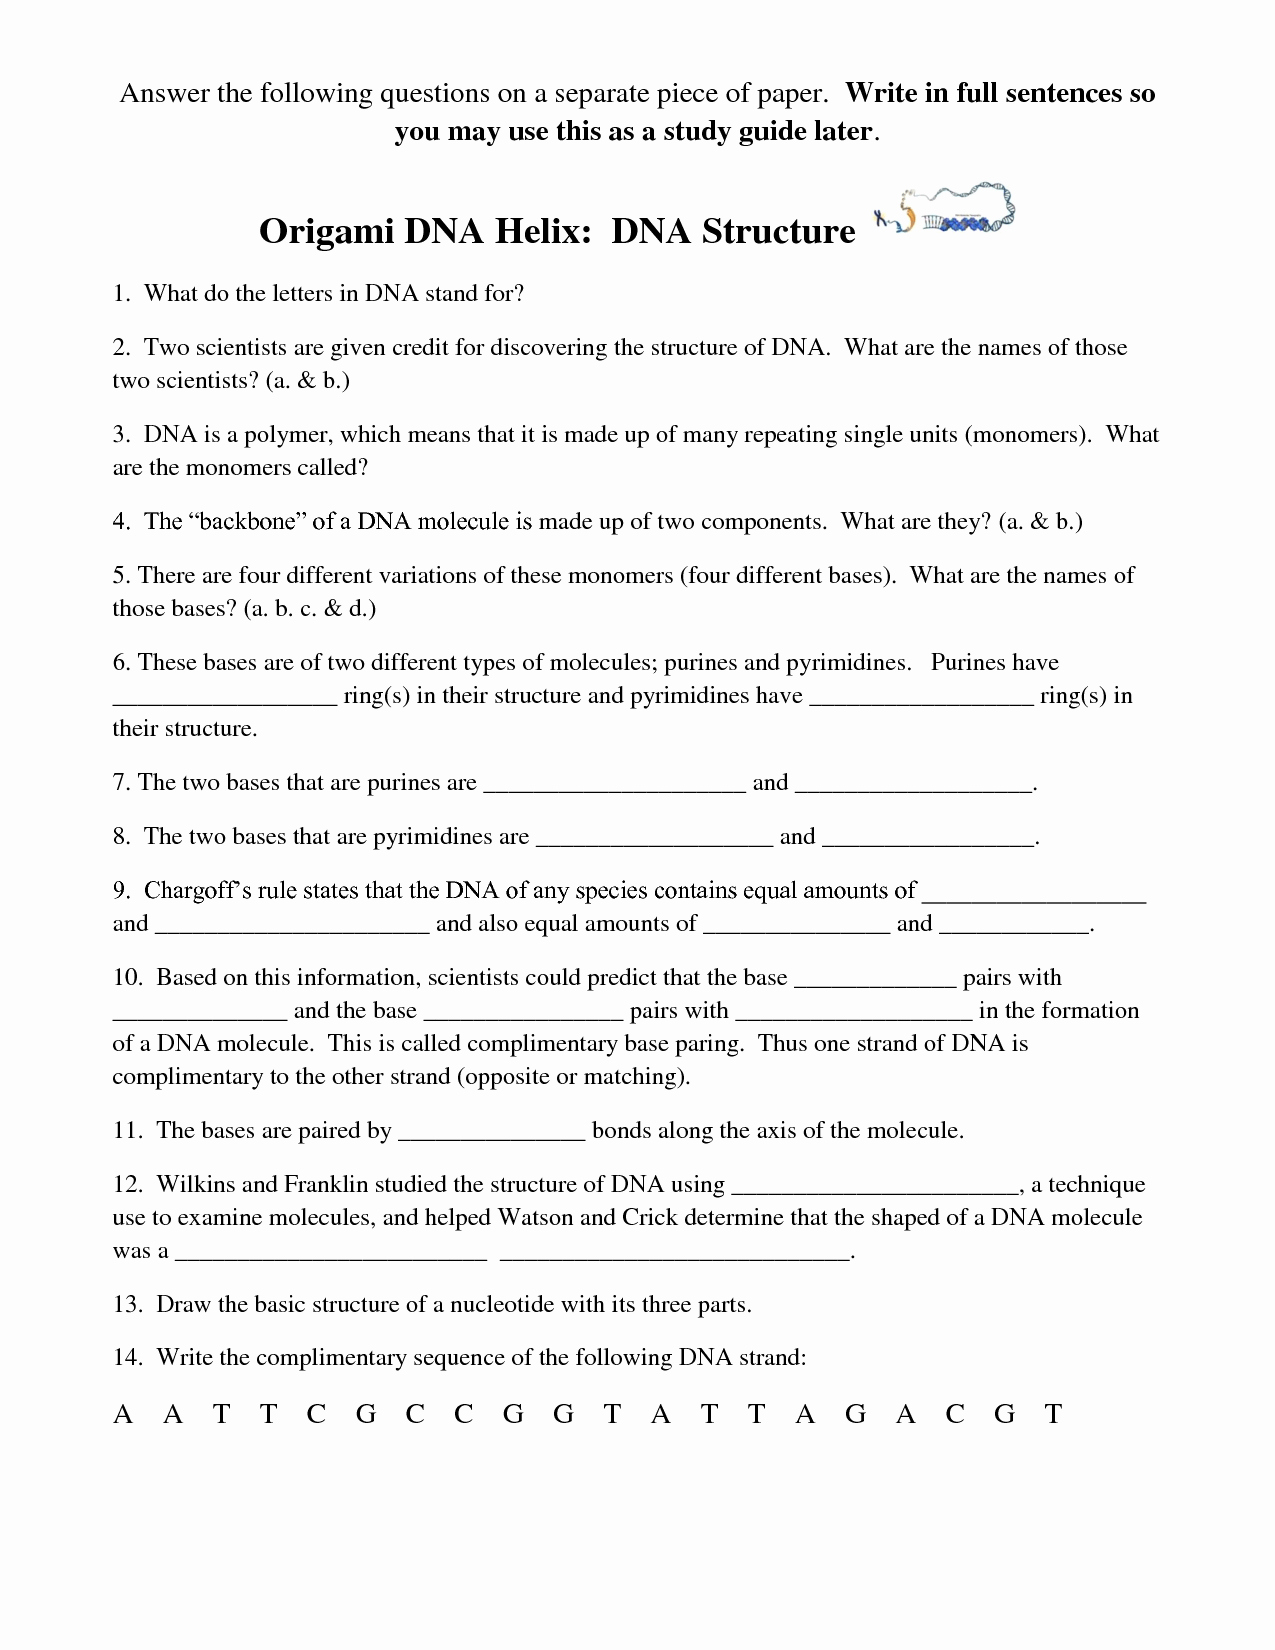 Dna the Double Helix Worksheet New Nucleic Acids Dna the Double Helix Worksheet Answers the